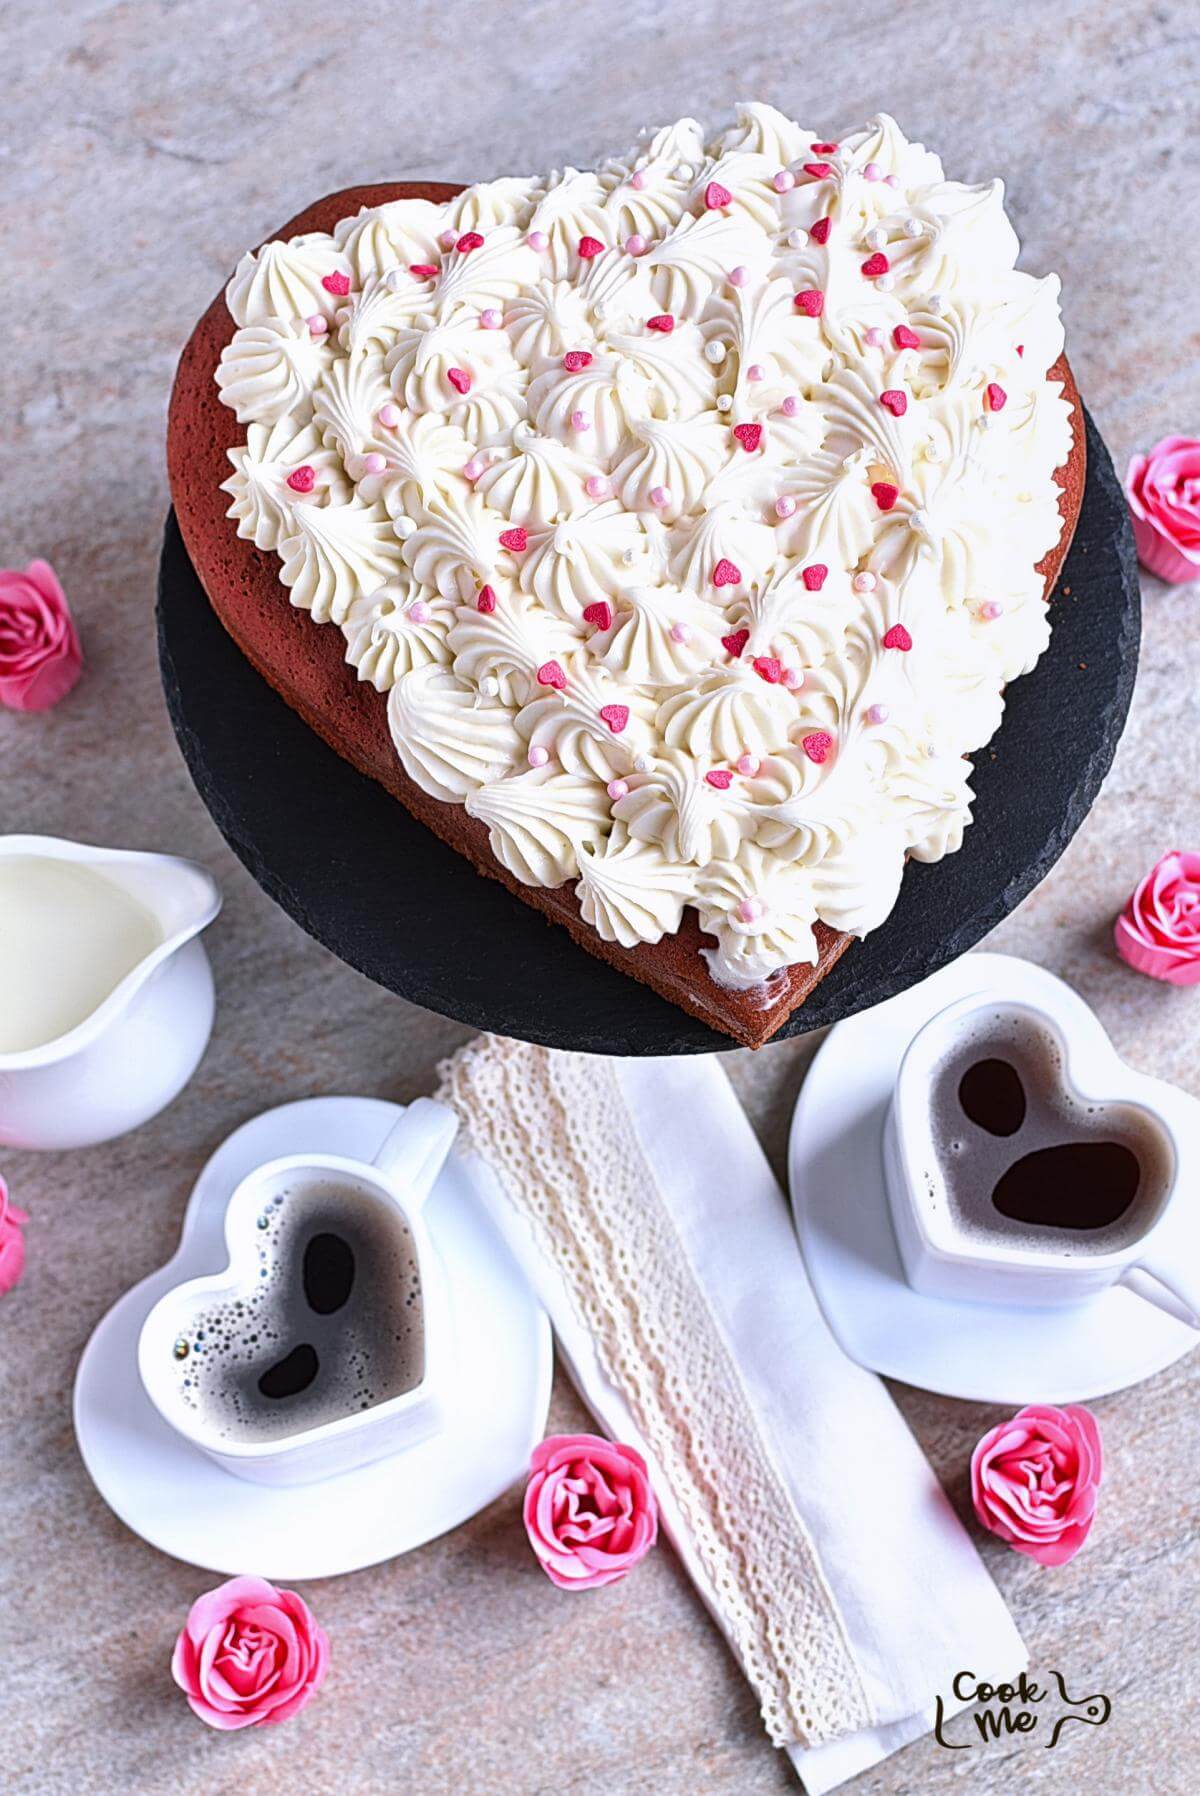 Surprise your Loved One with the best Red Velvet Cake in Gurgaon